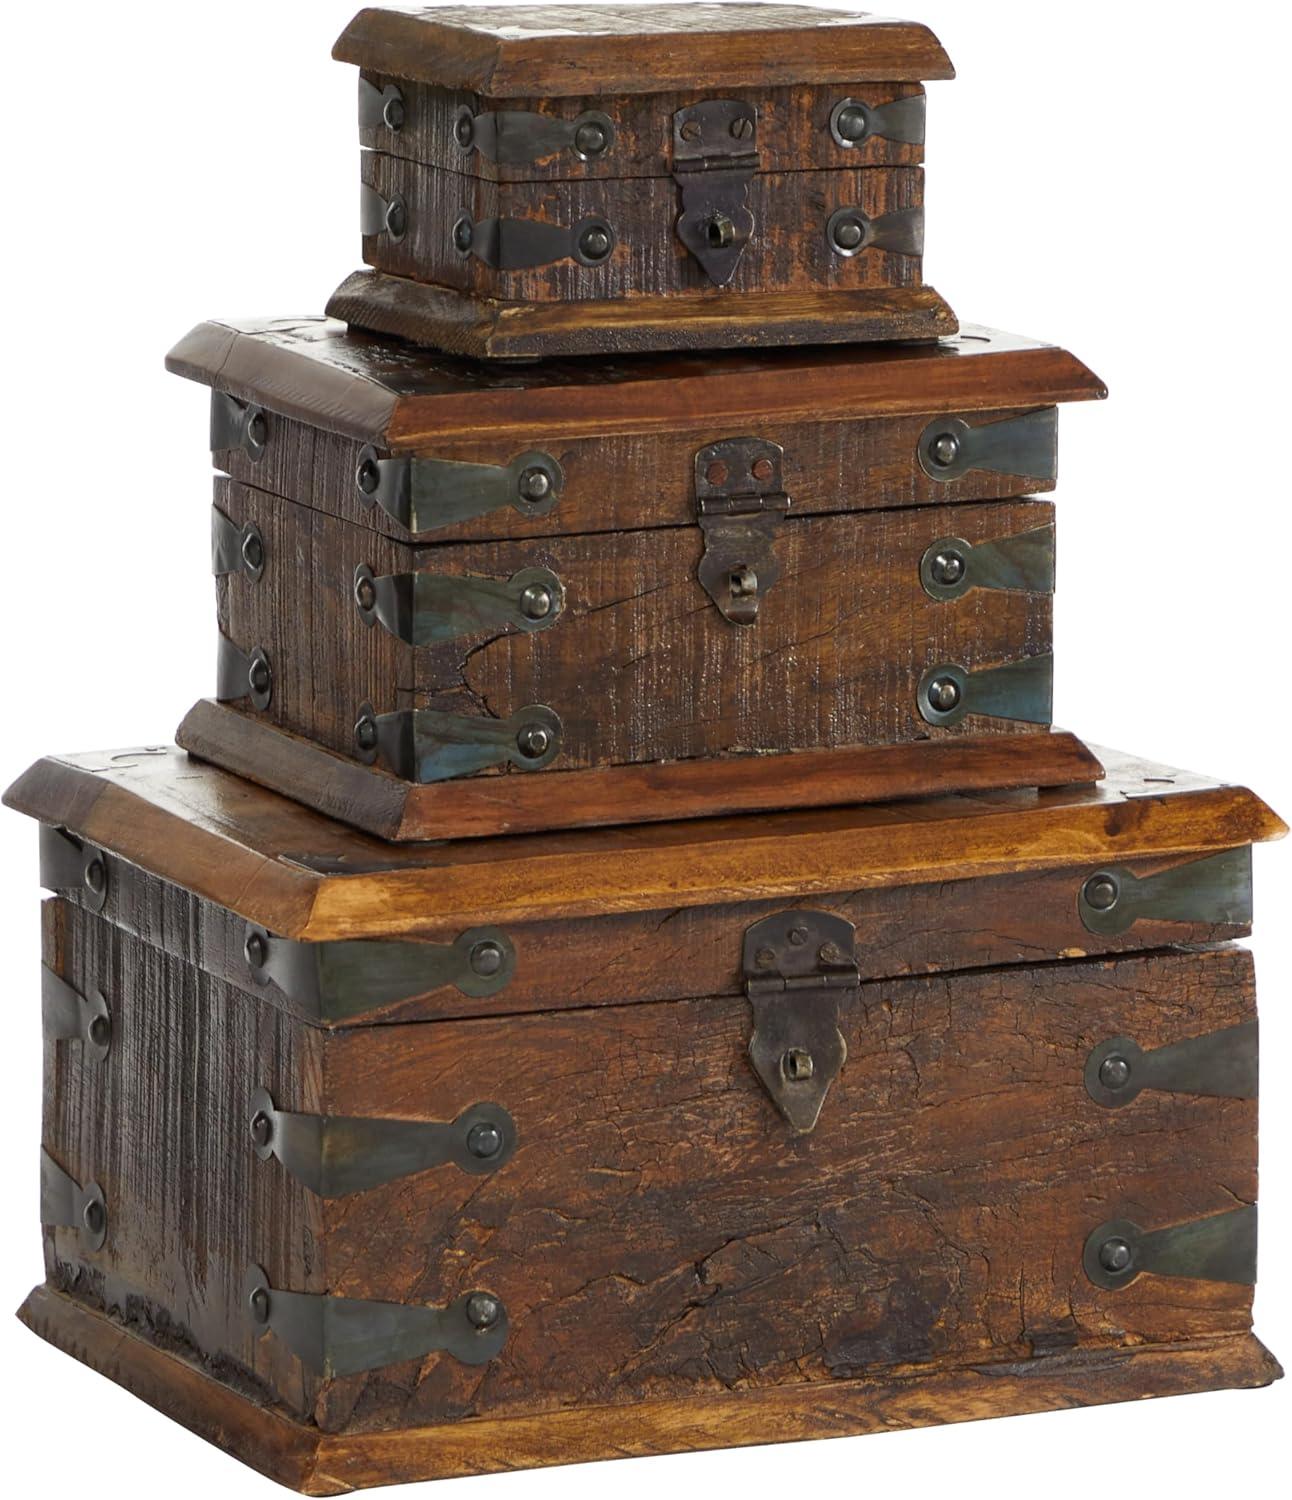 Rustic Reclaimed Wood Lidded Organizer Boxes with Dividers - Set of 3